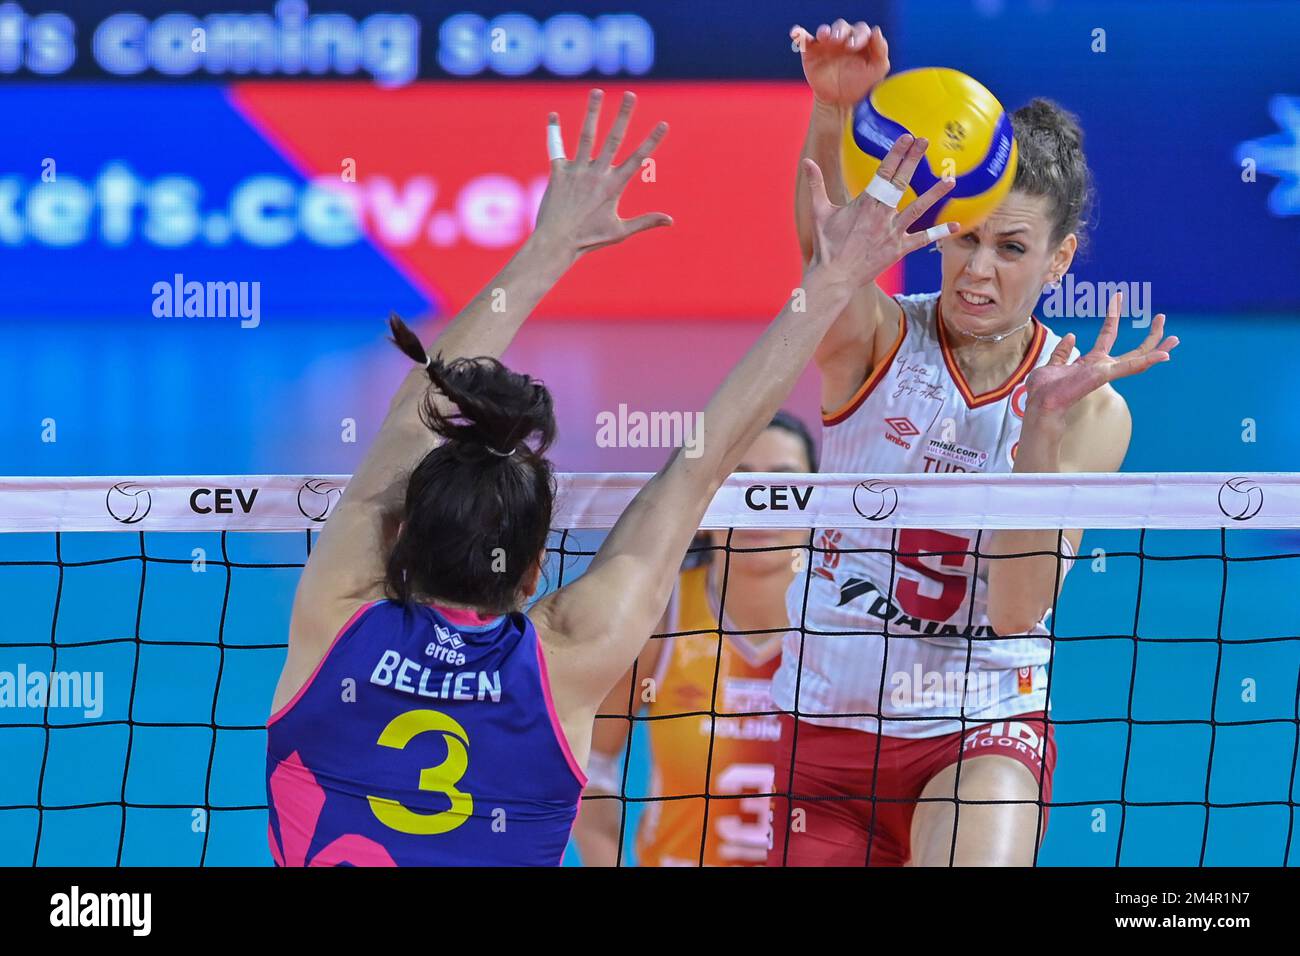 Florence, Italy. 22nd Dec, 2022. Mina Popovic (Galatasaray HDI Sigorta Istanbul) during Savino Del Bene Scandicci vs Galatasaray HDI Sigorta Istanbul, Volleyball CEV Cup Women Championship in Florence, Italy, December 22 2022 Credit: Independent Photo Agency/Alamy Live News Stock Photo